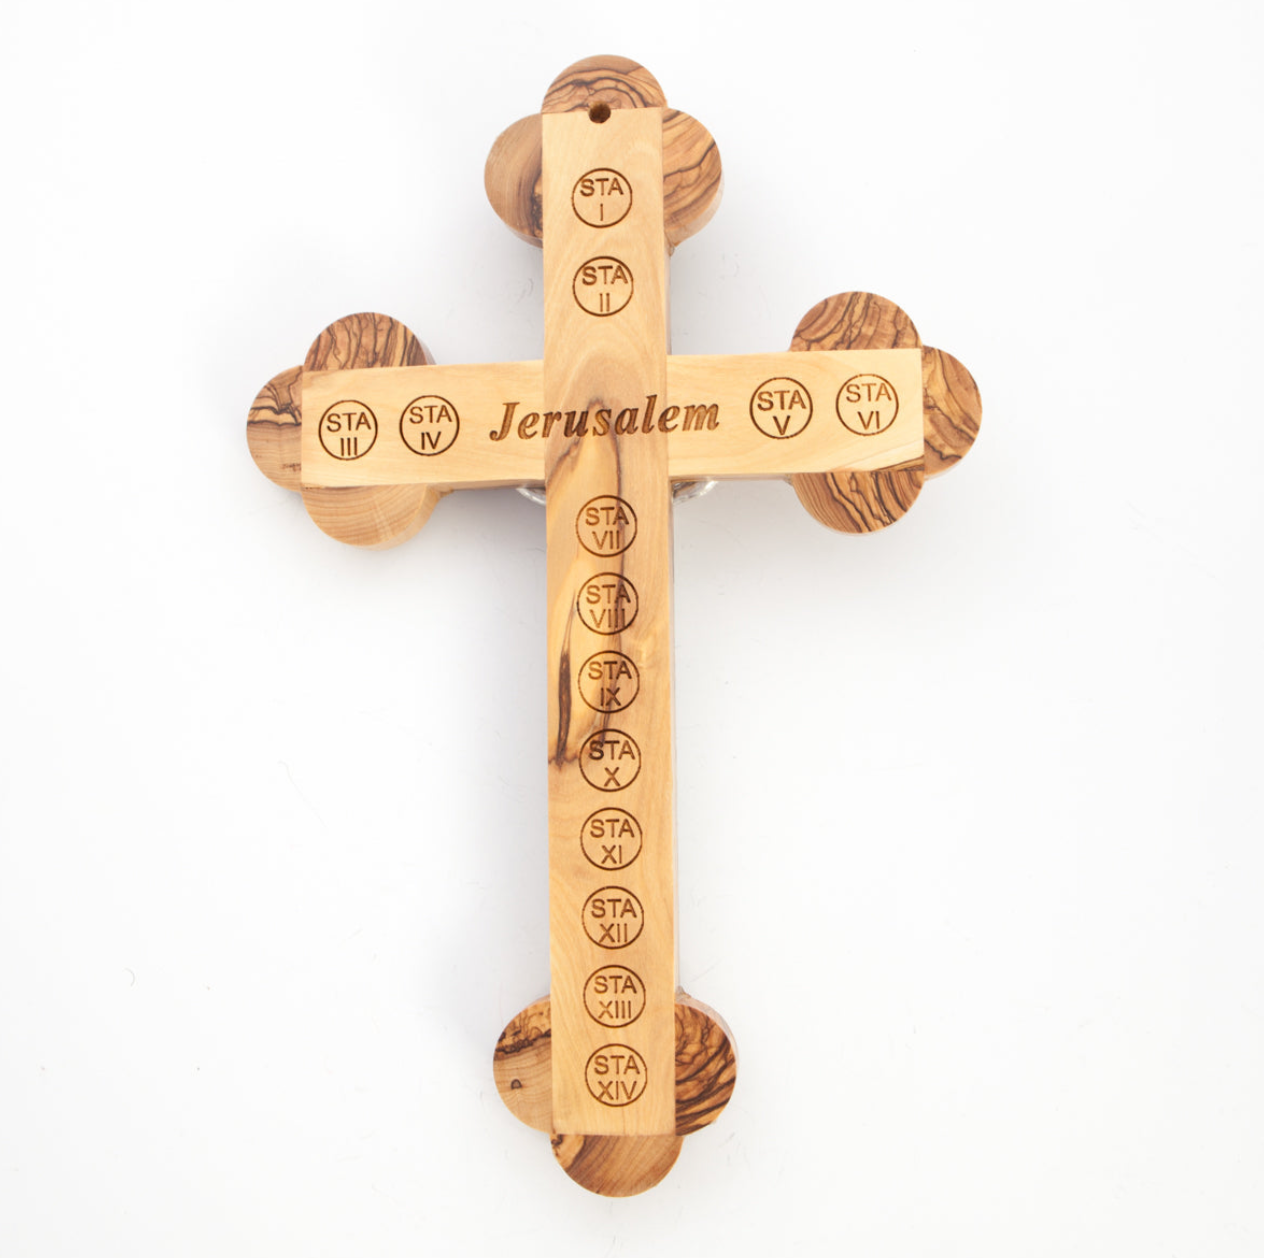 Large Budded Wall Cross Hand Made From Olive Wood in the Holy Land 14 Stations of Cross Engraved on Back with Jerusalem 